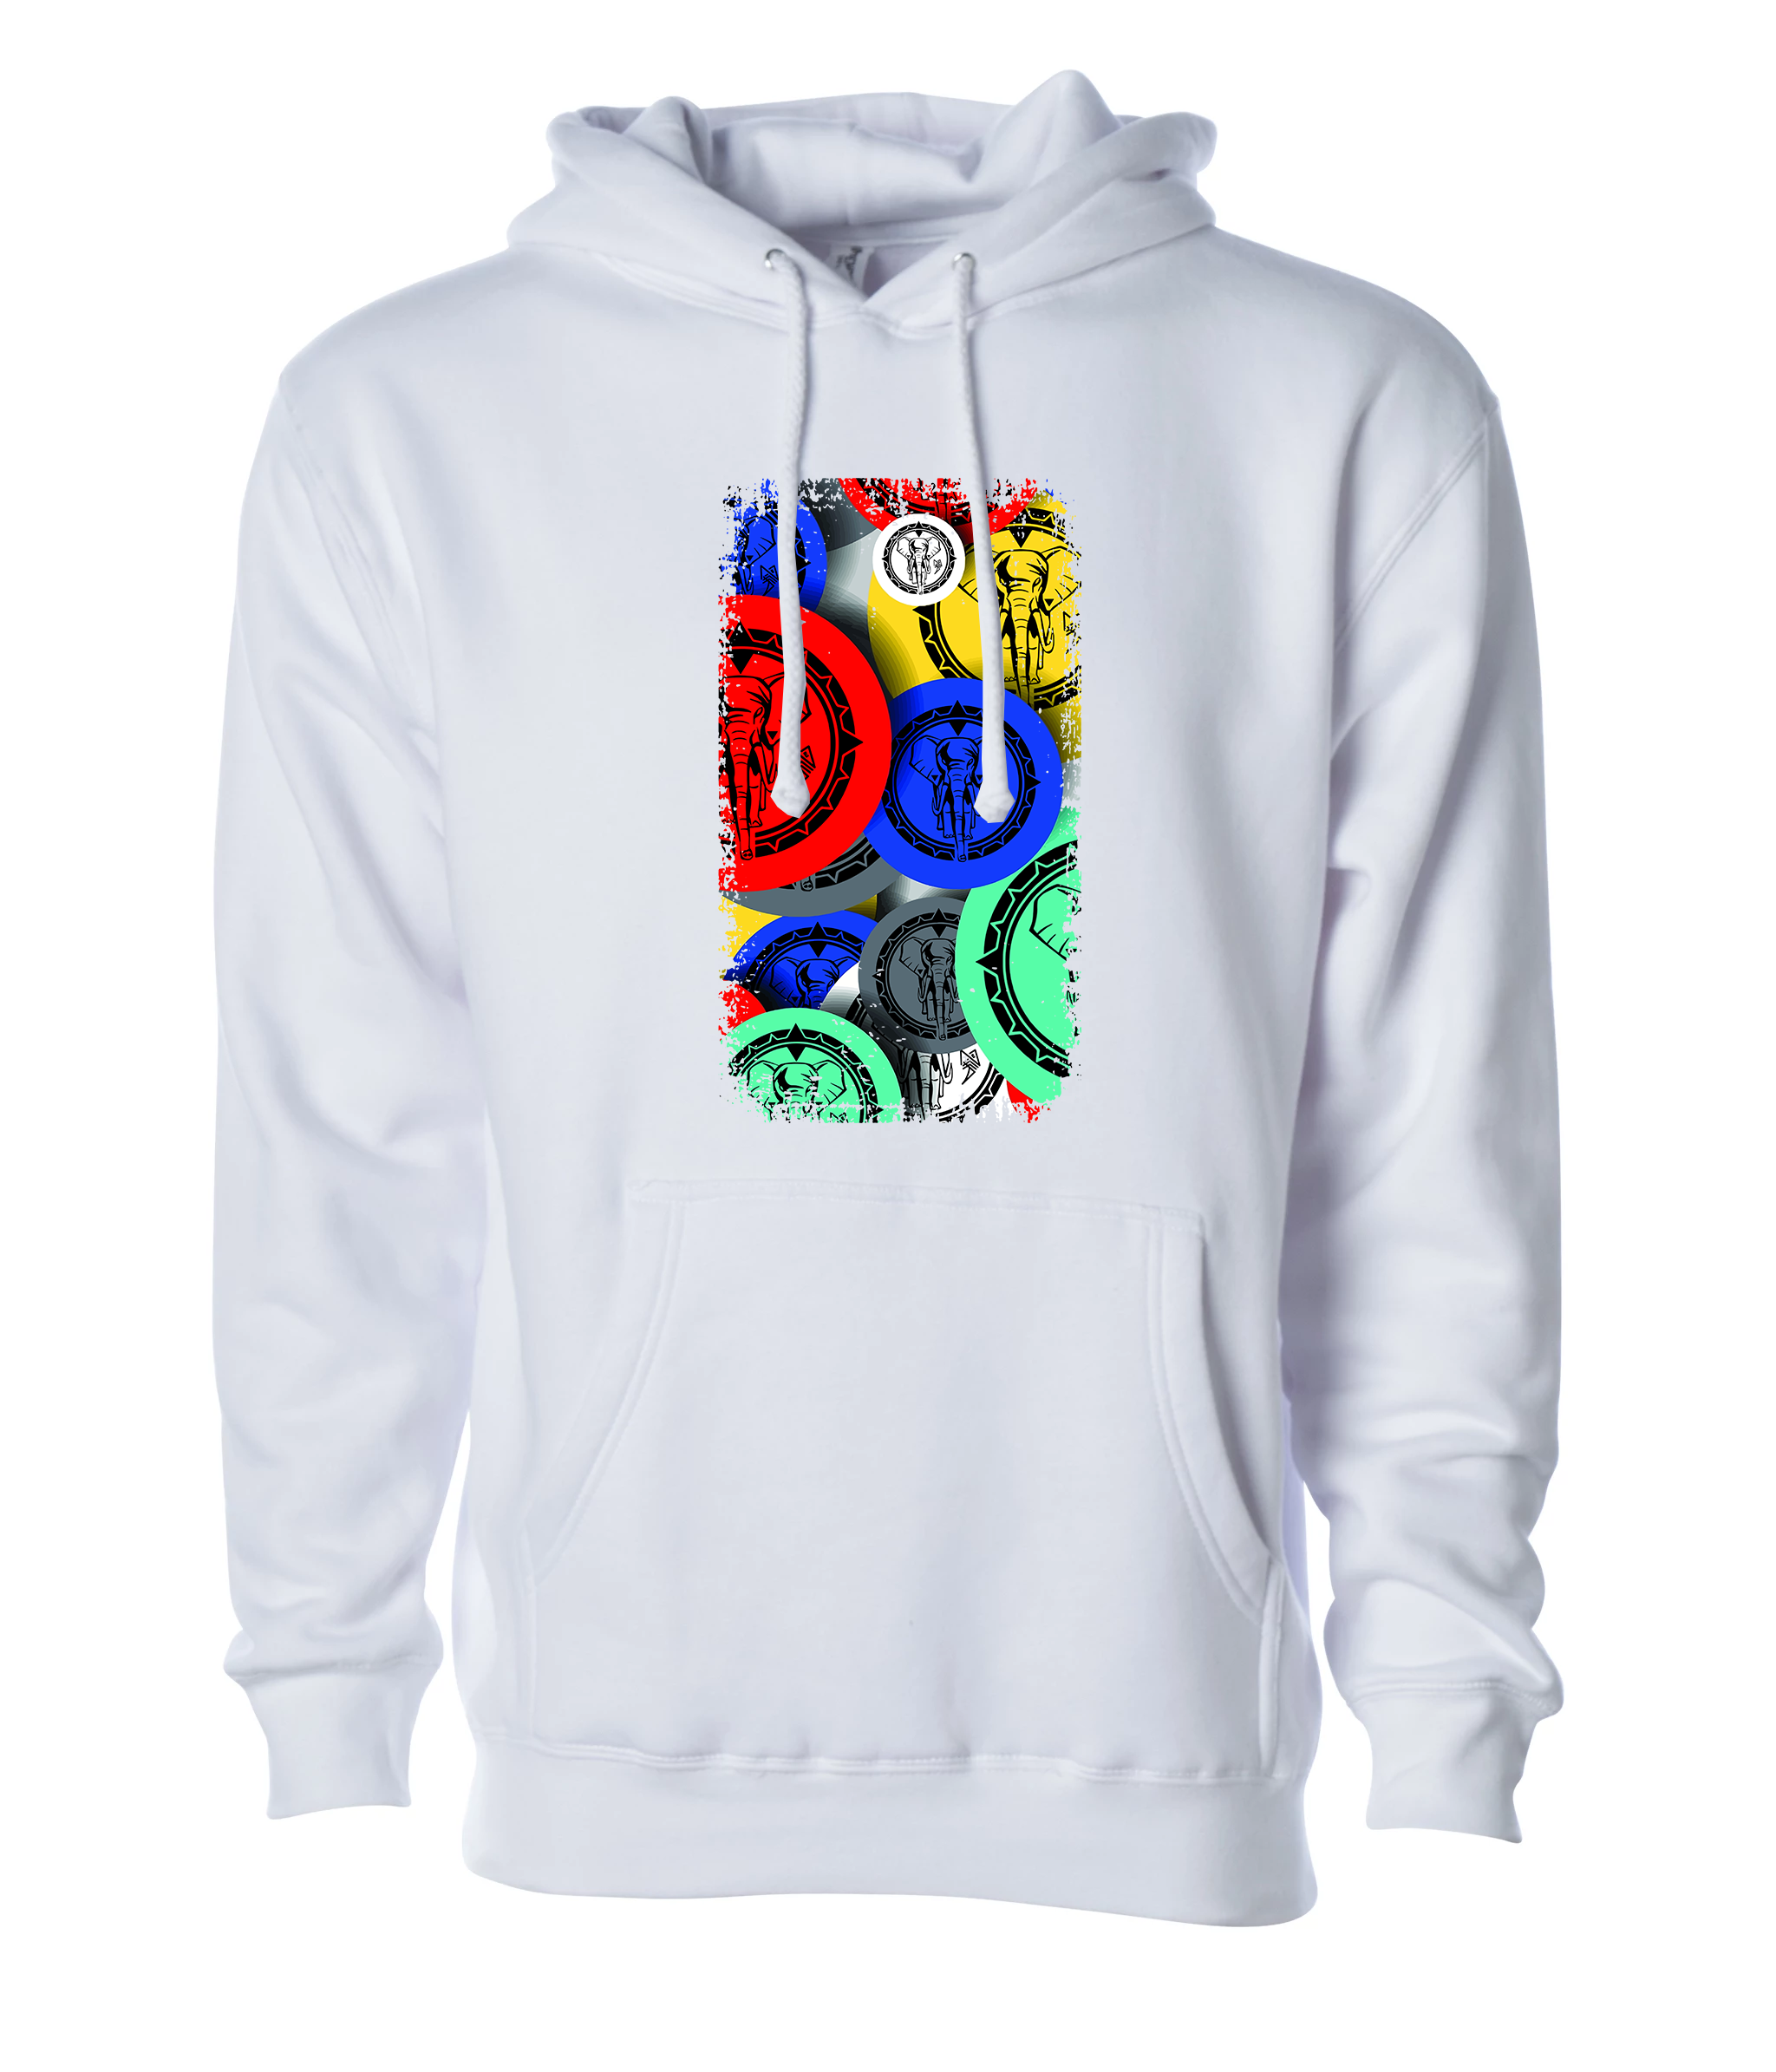 Colorful elephant face sign White Unisex Hoodie